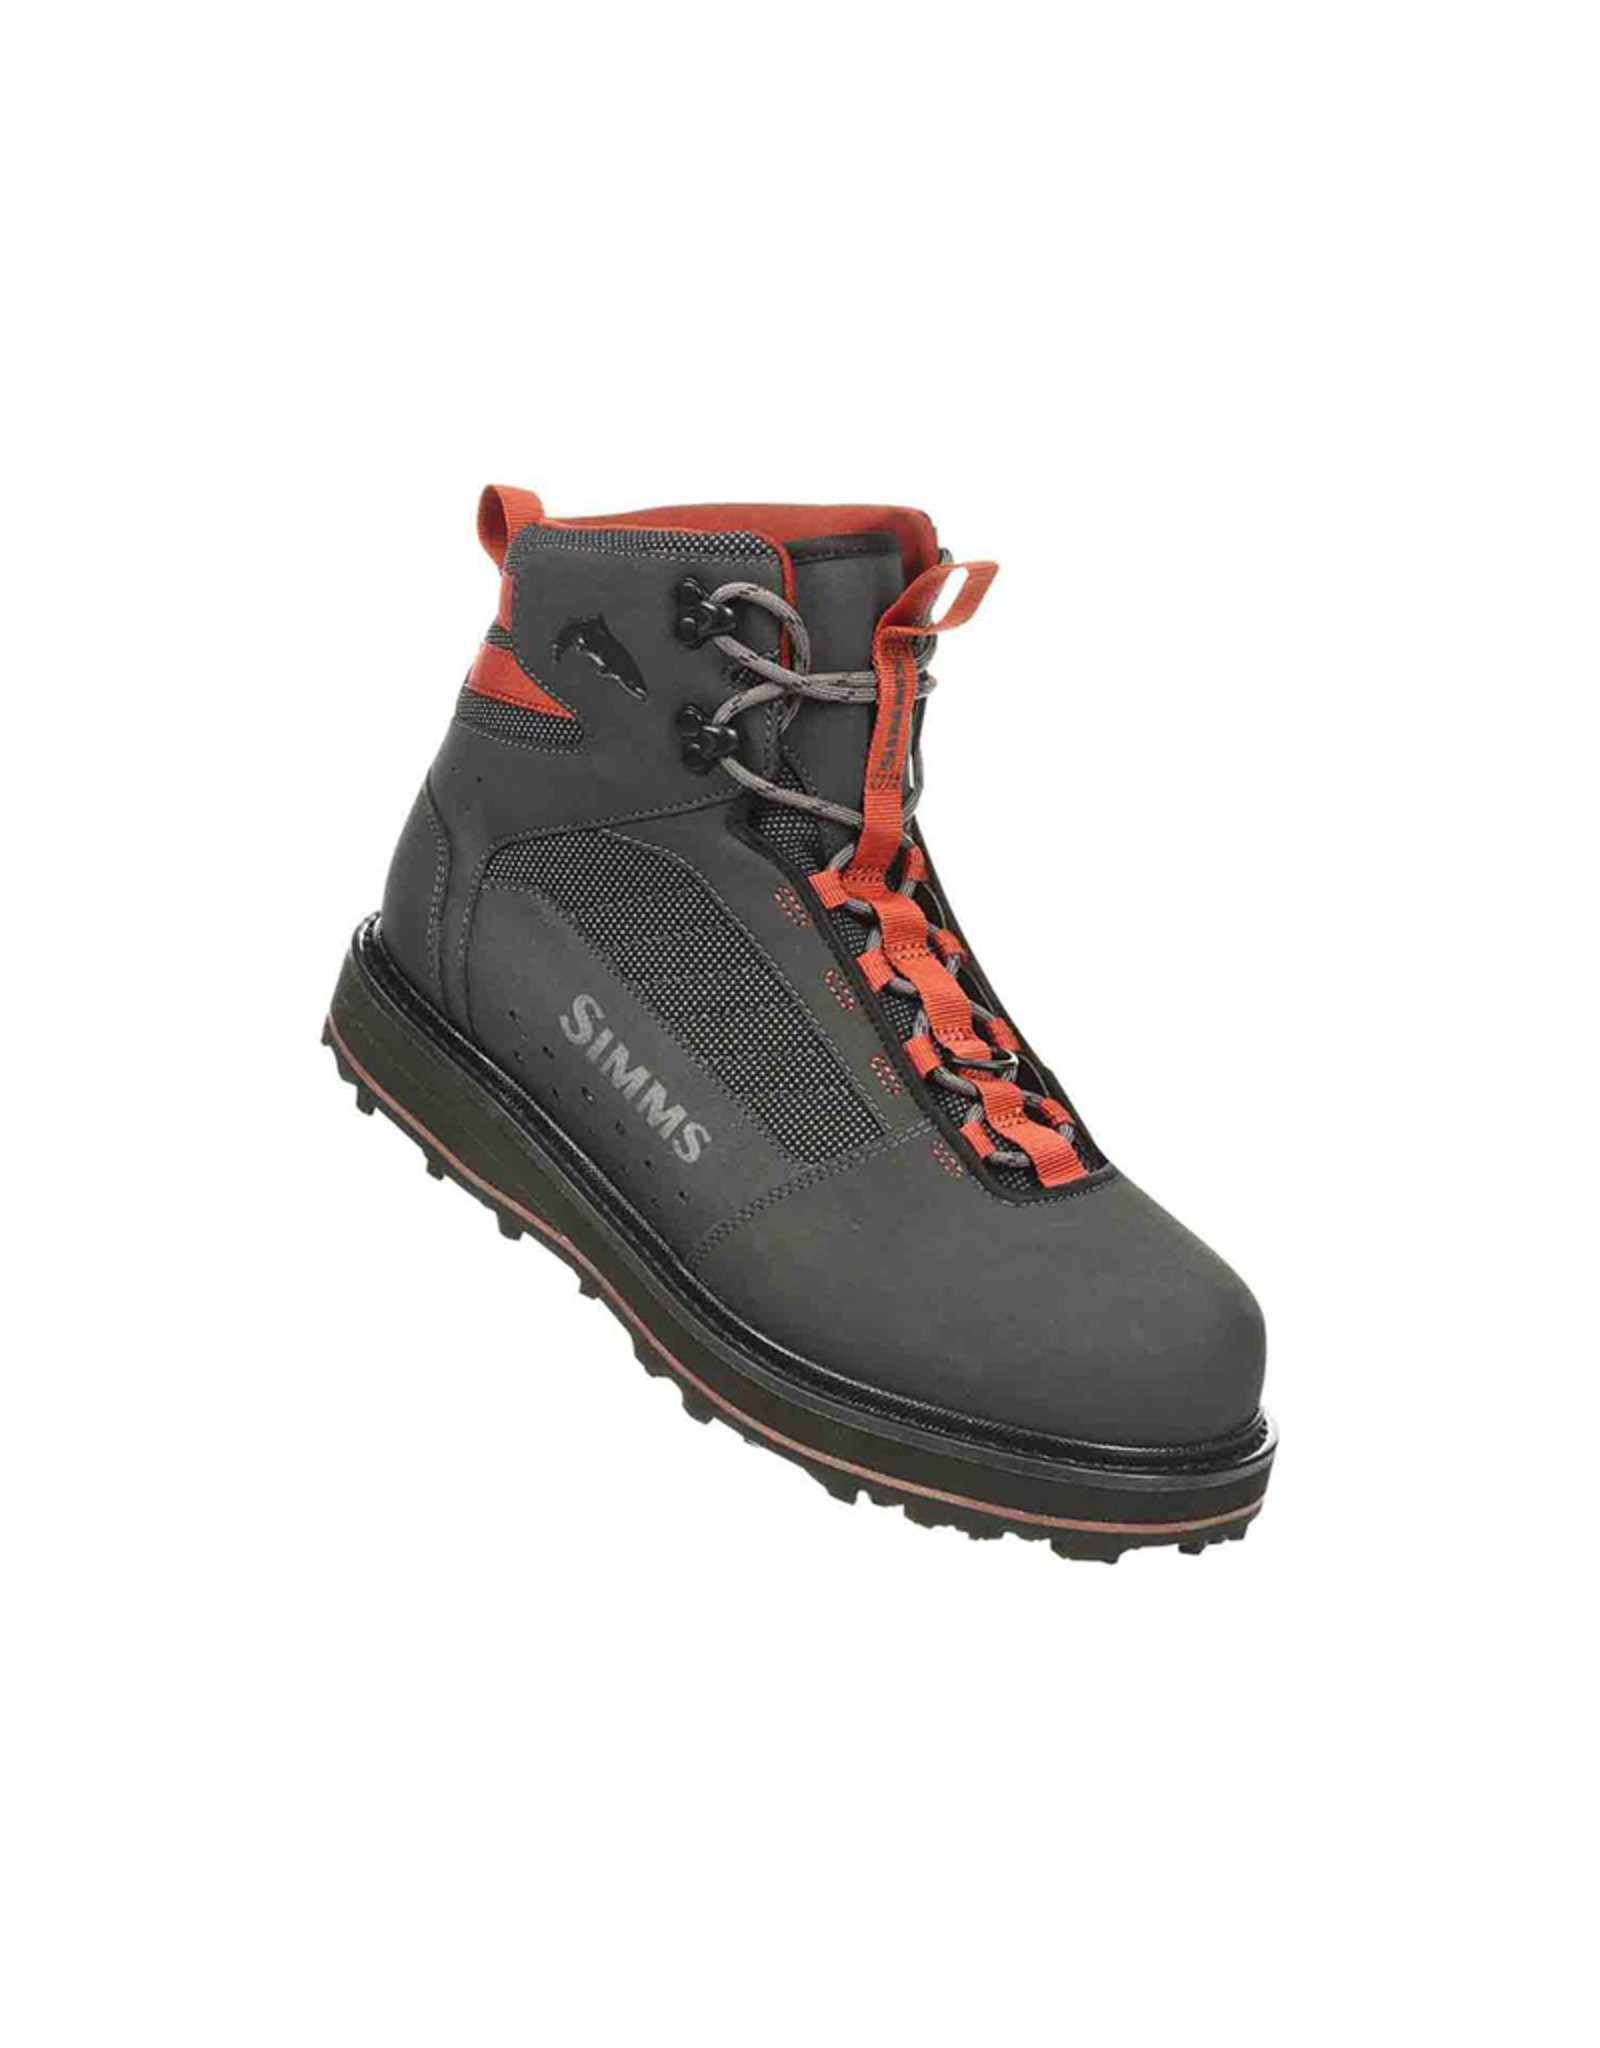 Simms Tributary Boot: Rubber Sole